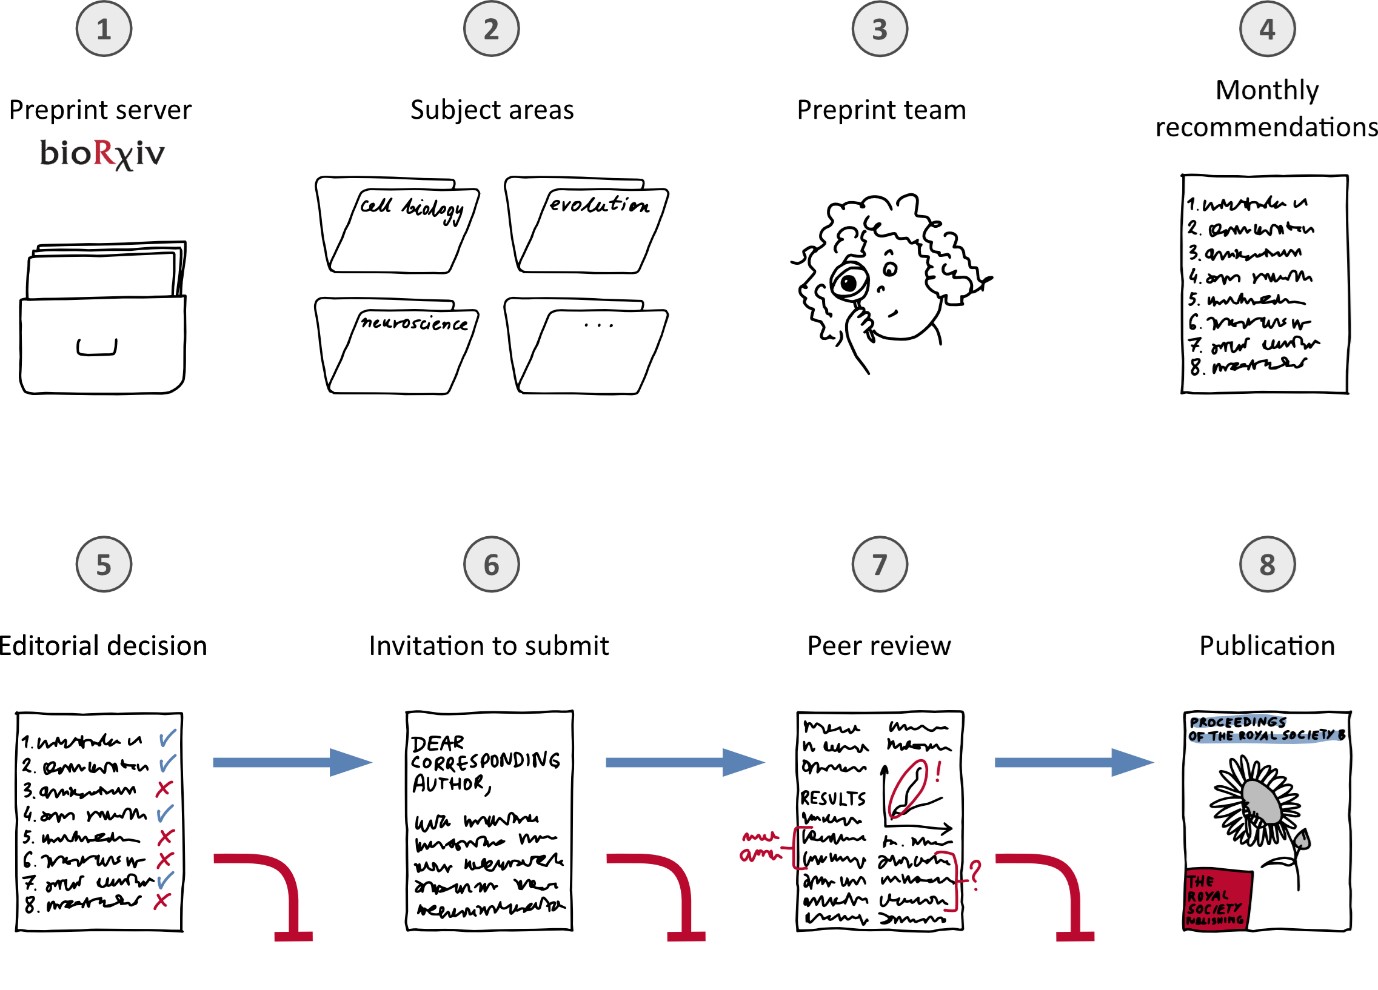 Figure 1 - created by Dorota Paczesniak, from Development, Implementation, and Impact of a New Preprint Solicitation Process at Proceedings B